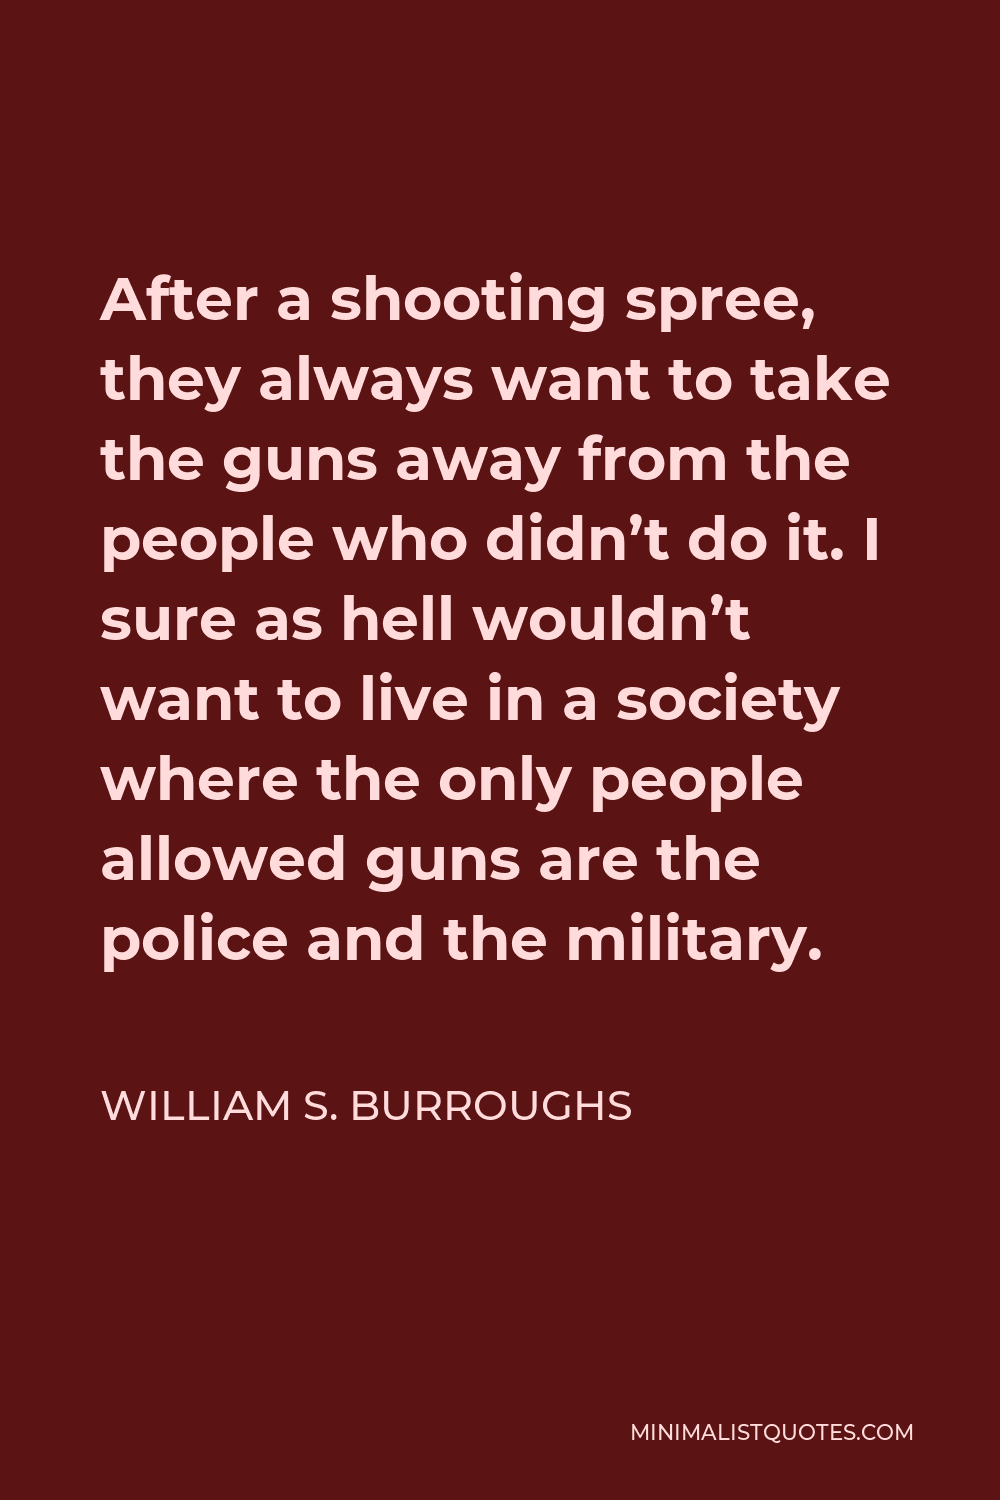 William S. Burroughs Quote - After a shooting spree, they always want to take the guns away from the people who didn’t do it. I sure as hell wouldn’t want to live in a society where the only people allowed guns are the police and the military.